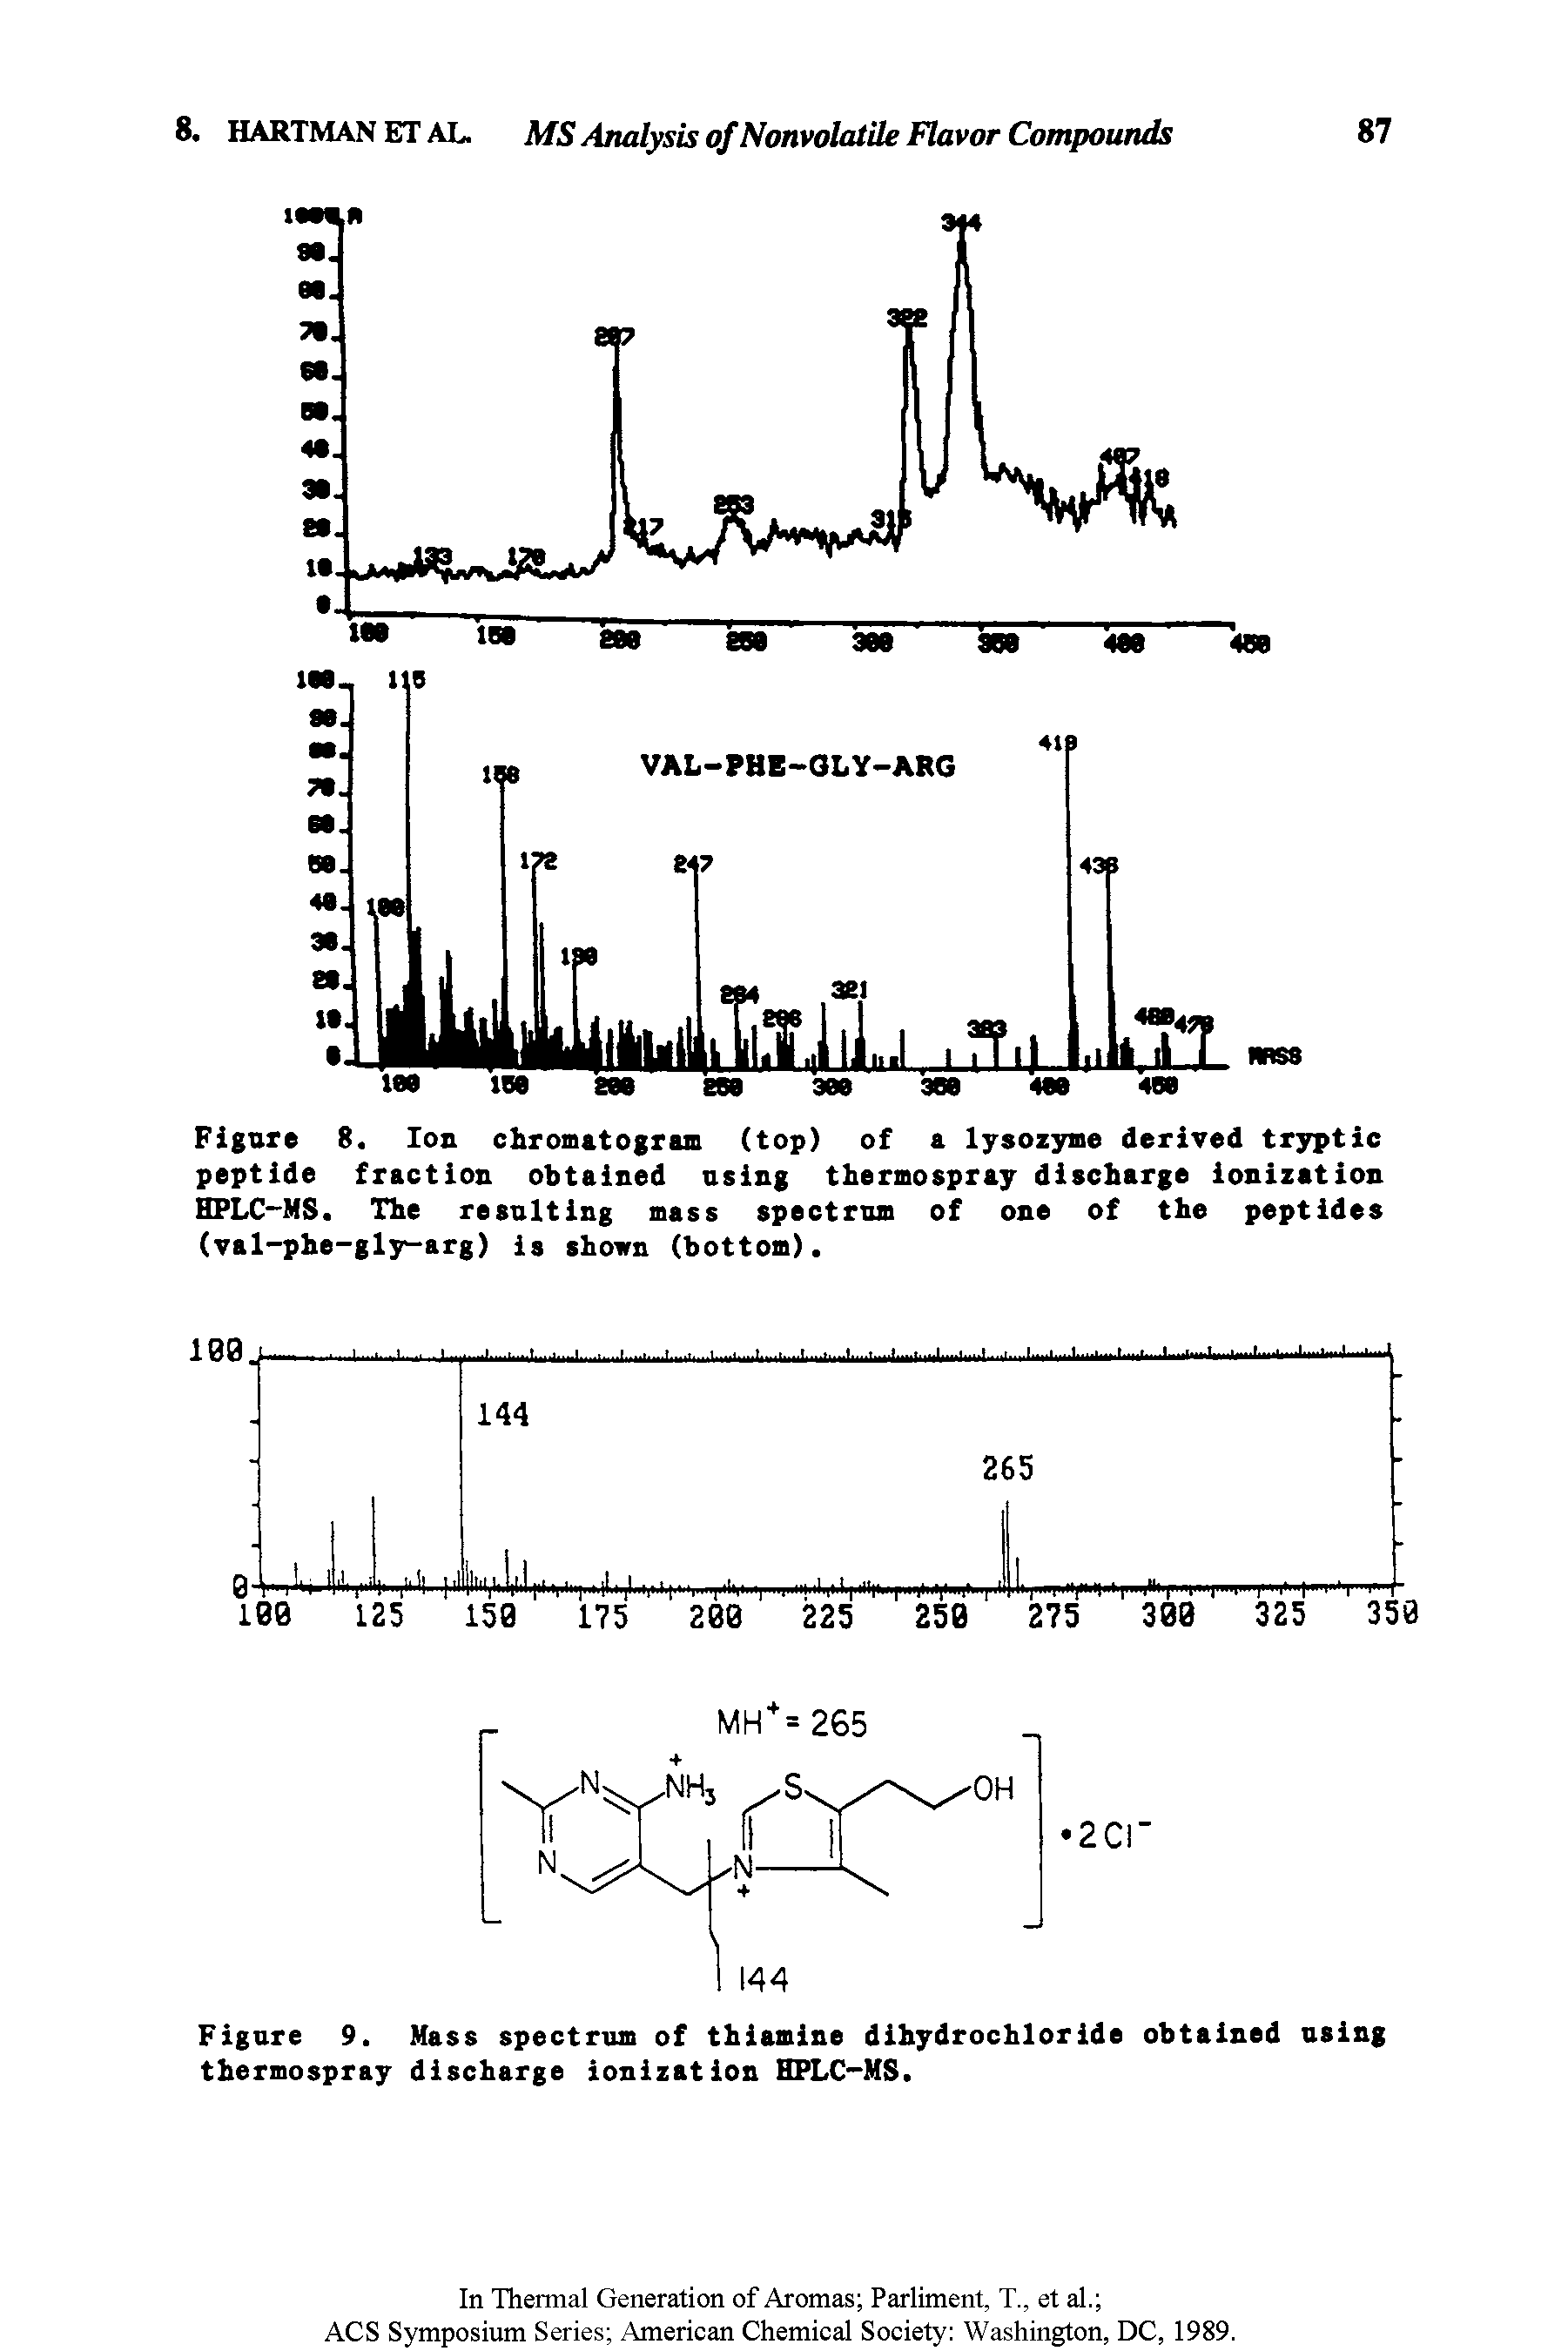 Figure 8. Ion chromatogram (top) of a lysozyme derived tryptic peptide fraction obtained using thermospray discharge ionization HPLC-MS. The resulting mass spectrum of one of the peptides (val-phe-gly-arg) is shown (bottom).